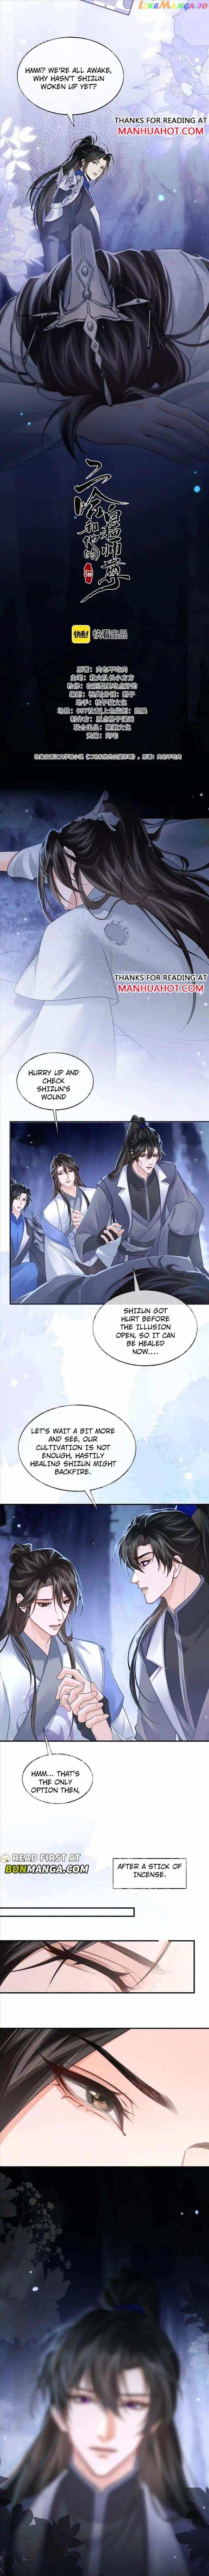 The Husky And His White Cat Shizun - Page 3